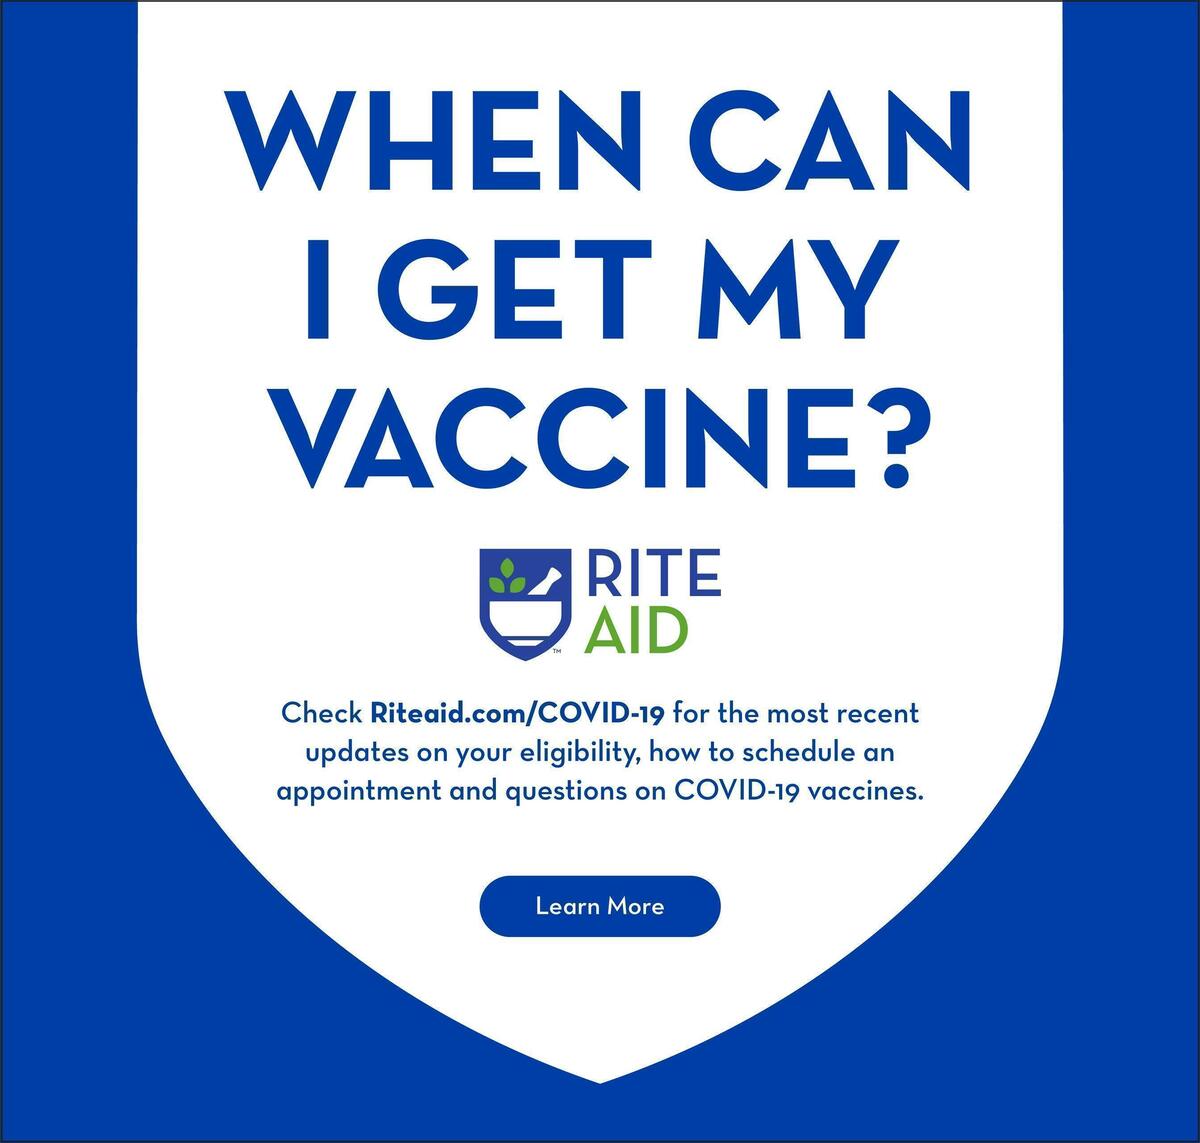 Rite Aid Weekly Ad from July 11